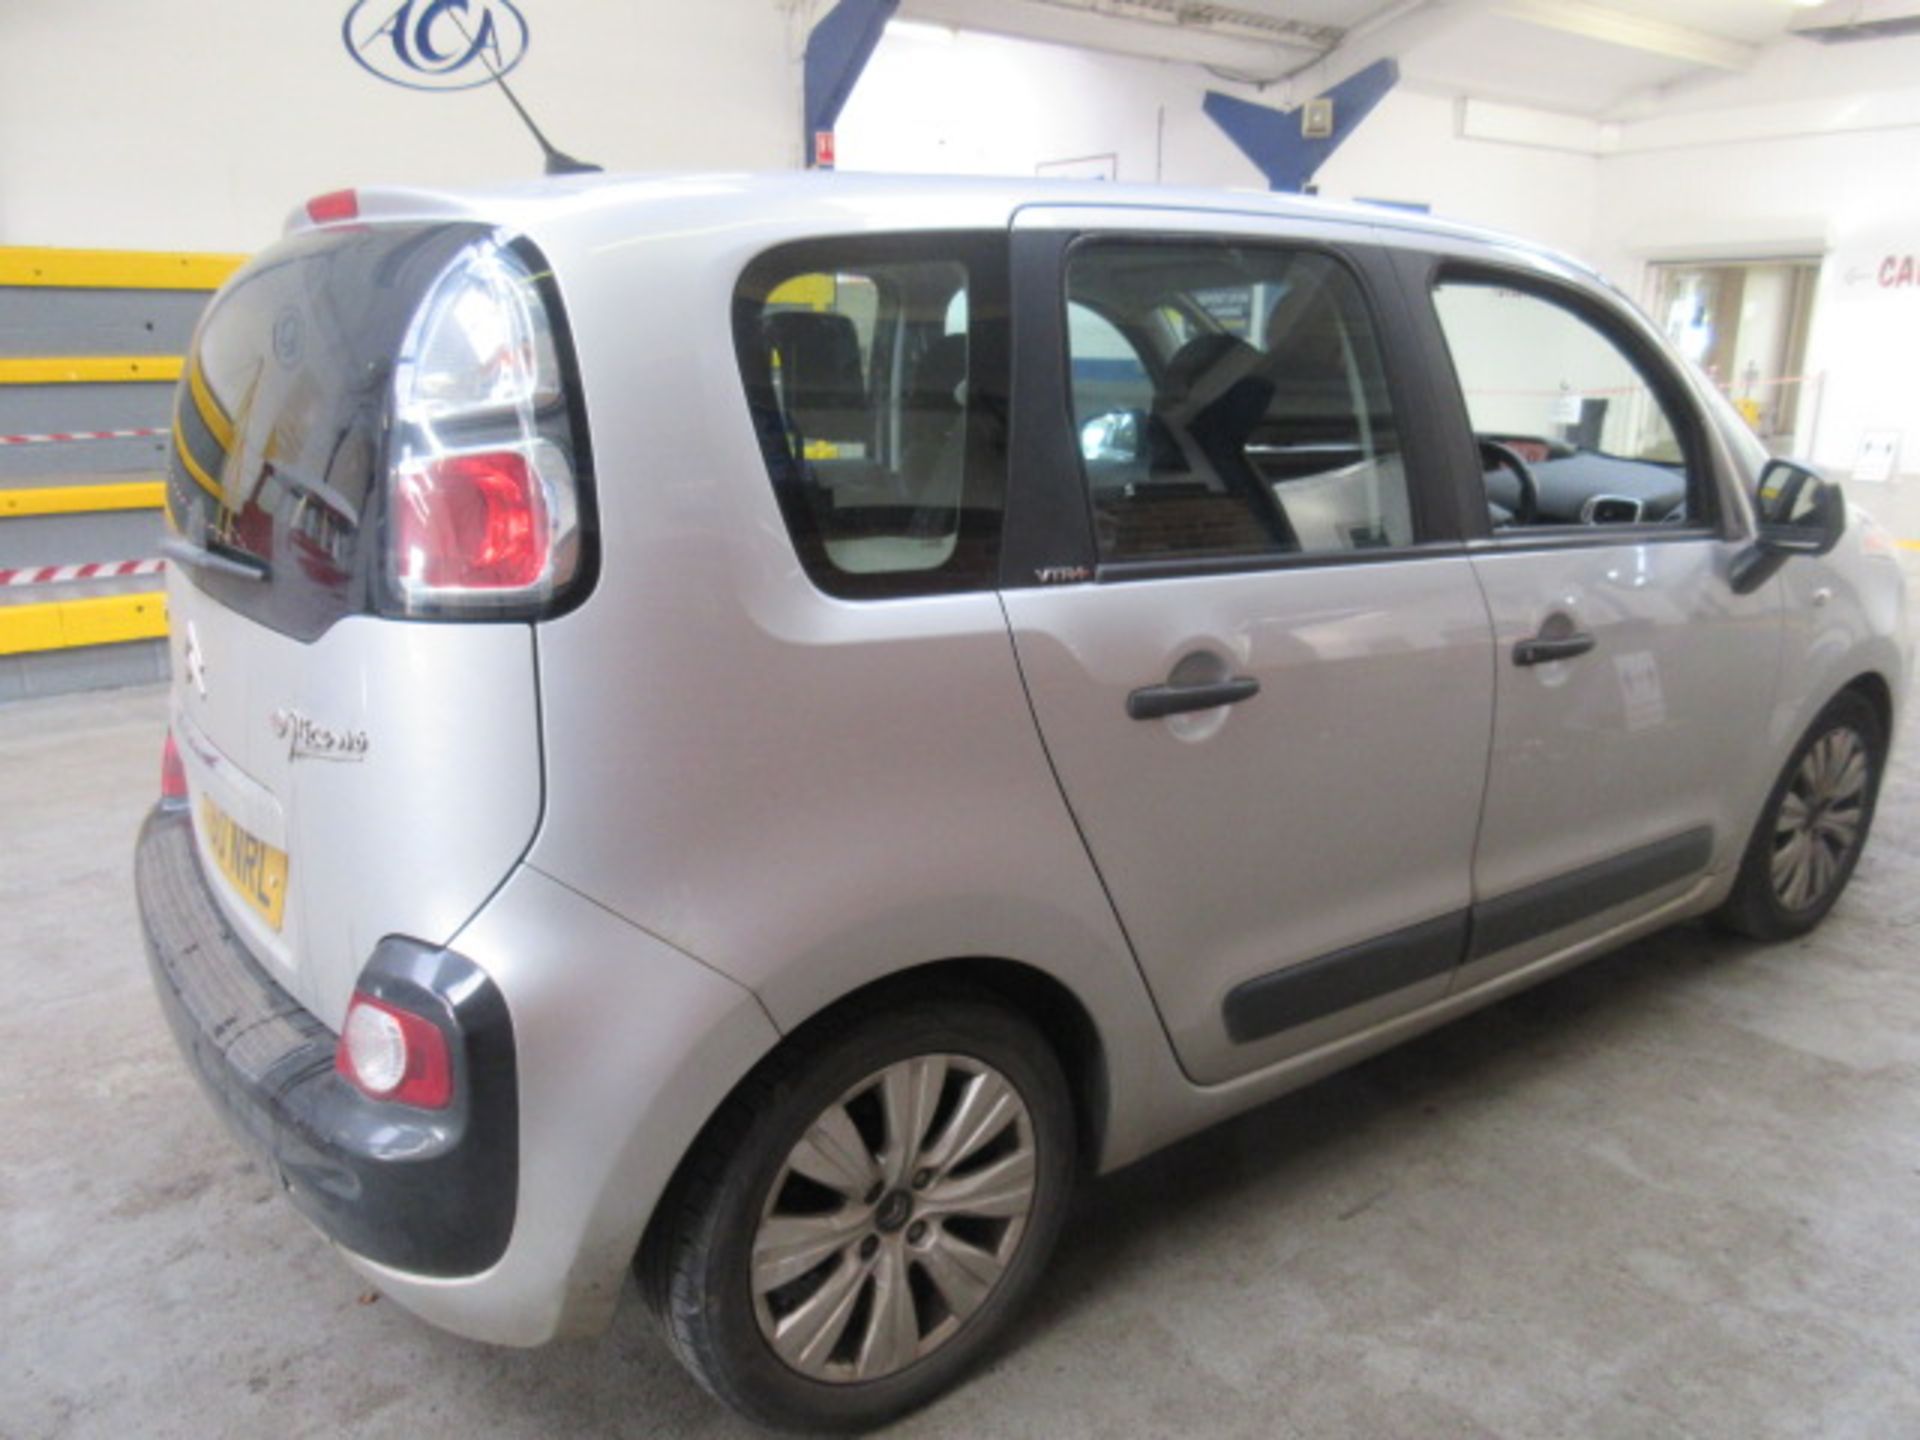 2010 Citroen C3 Picasso VTR+ HDI - Image 3 of 7